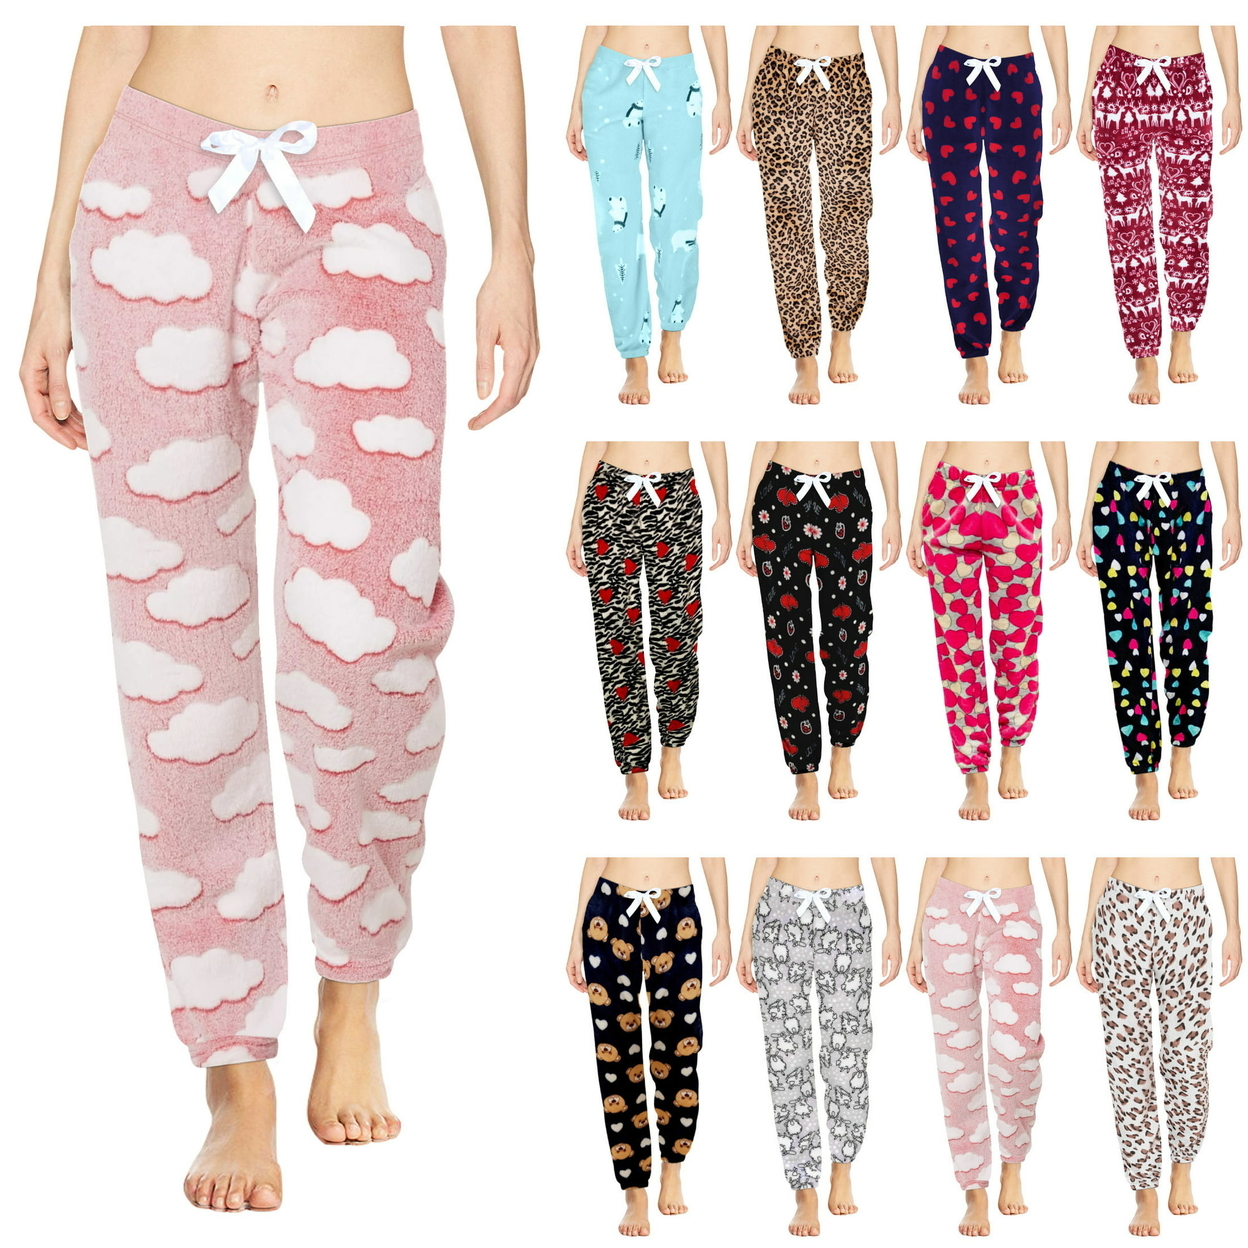 4-Pack: Women's Solid & Printed Ultra-Soft Comfy Stretch Micro-Fleece Pajama Lounge Pants - X-large, Animal